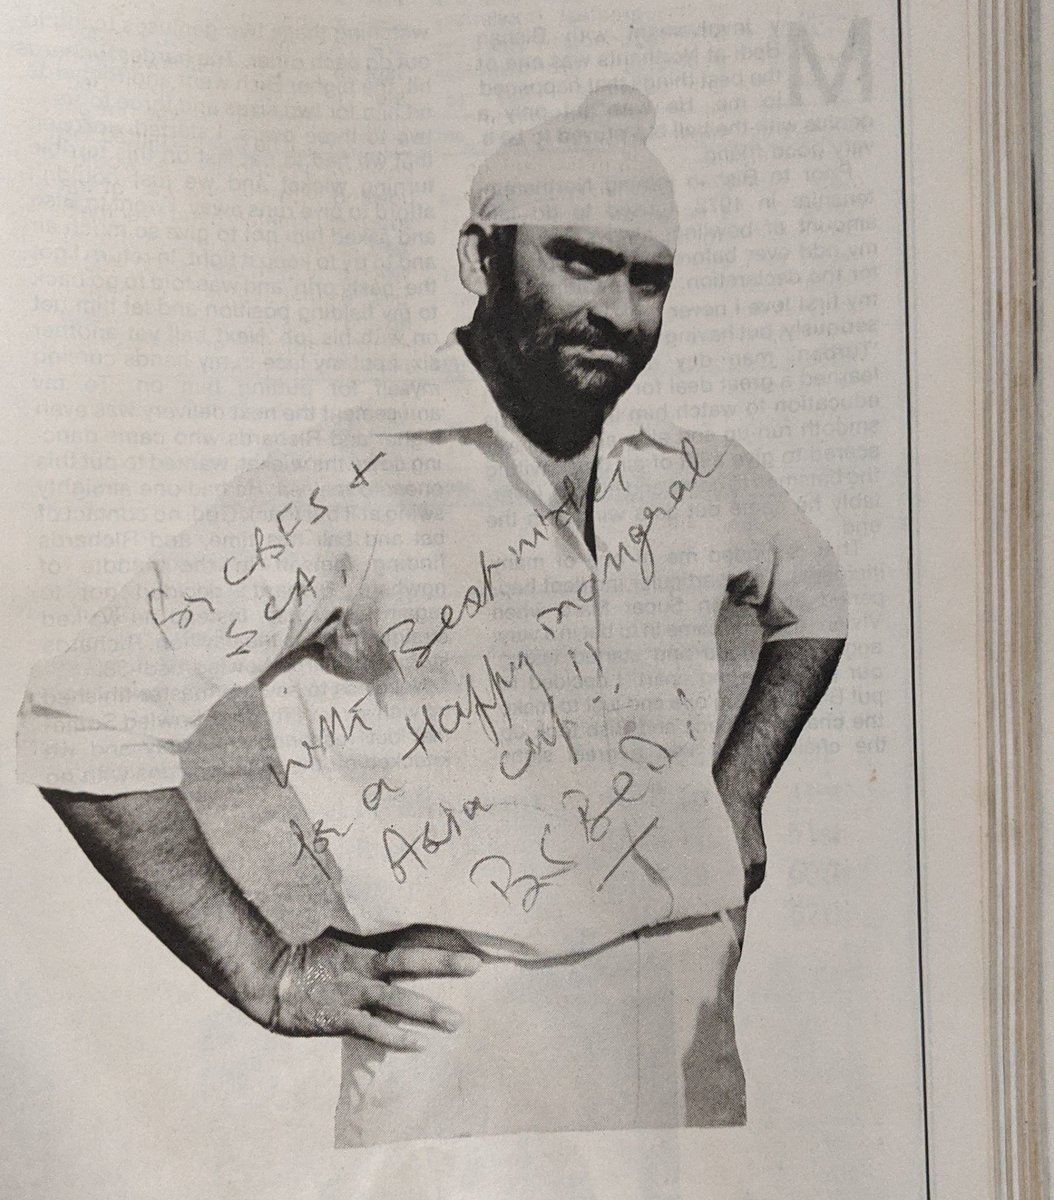 But the thing that caught my eye and what makes this issue truly memorable are the articles by Sir Don Bradman, Vijay Merchant and Mushtaq Mohammad on  @BishanBedi  @NorthStandGang  @vijaylokapally  @jaigalagali